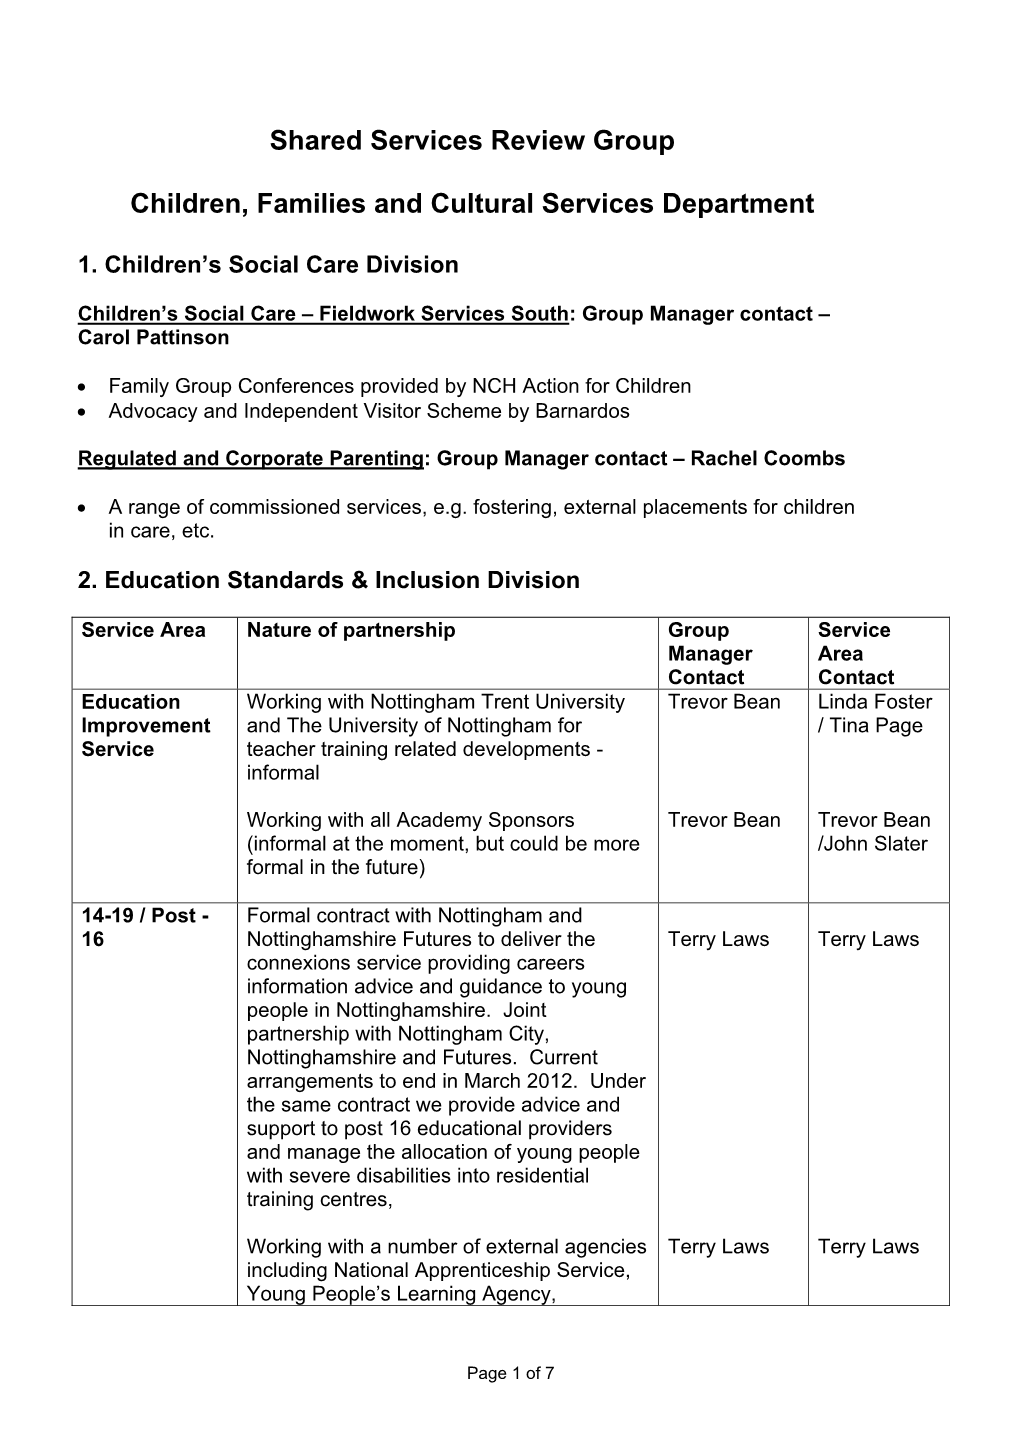 Shared Services Review Group Children, Families and Cultural